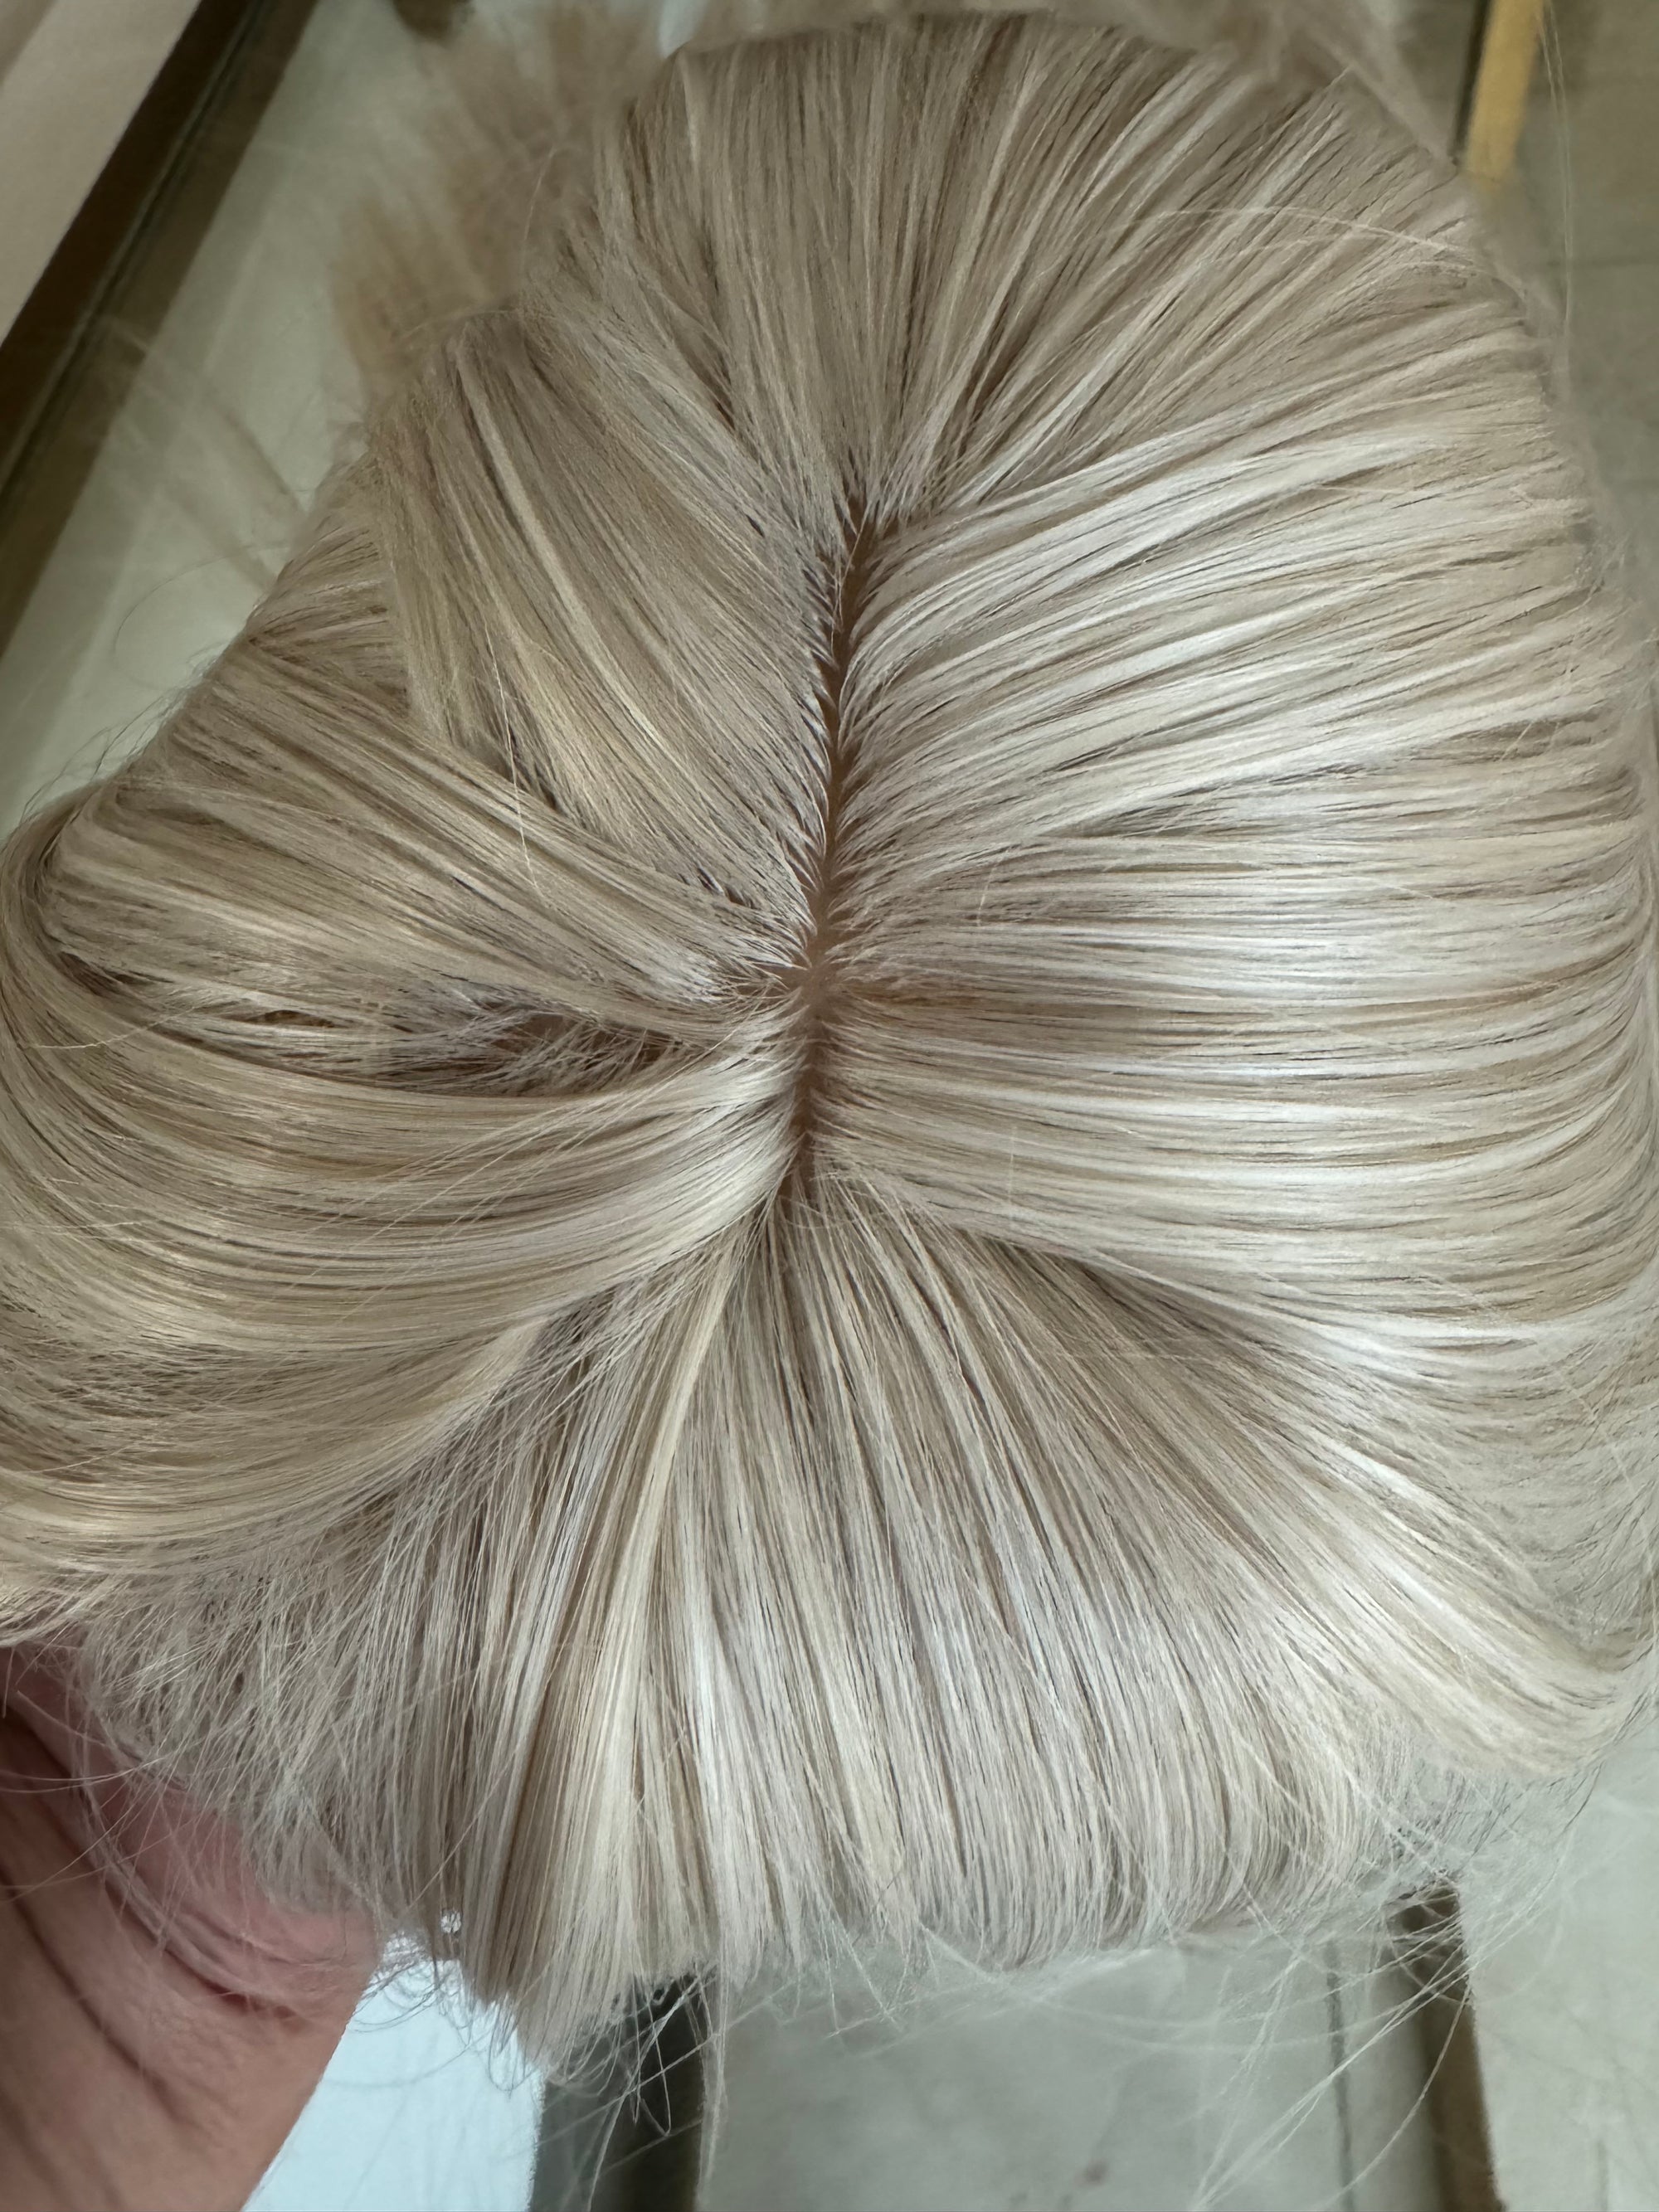 Tillstyle White hair topper with bangs/ash blonde highlighted